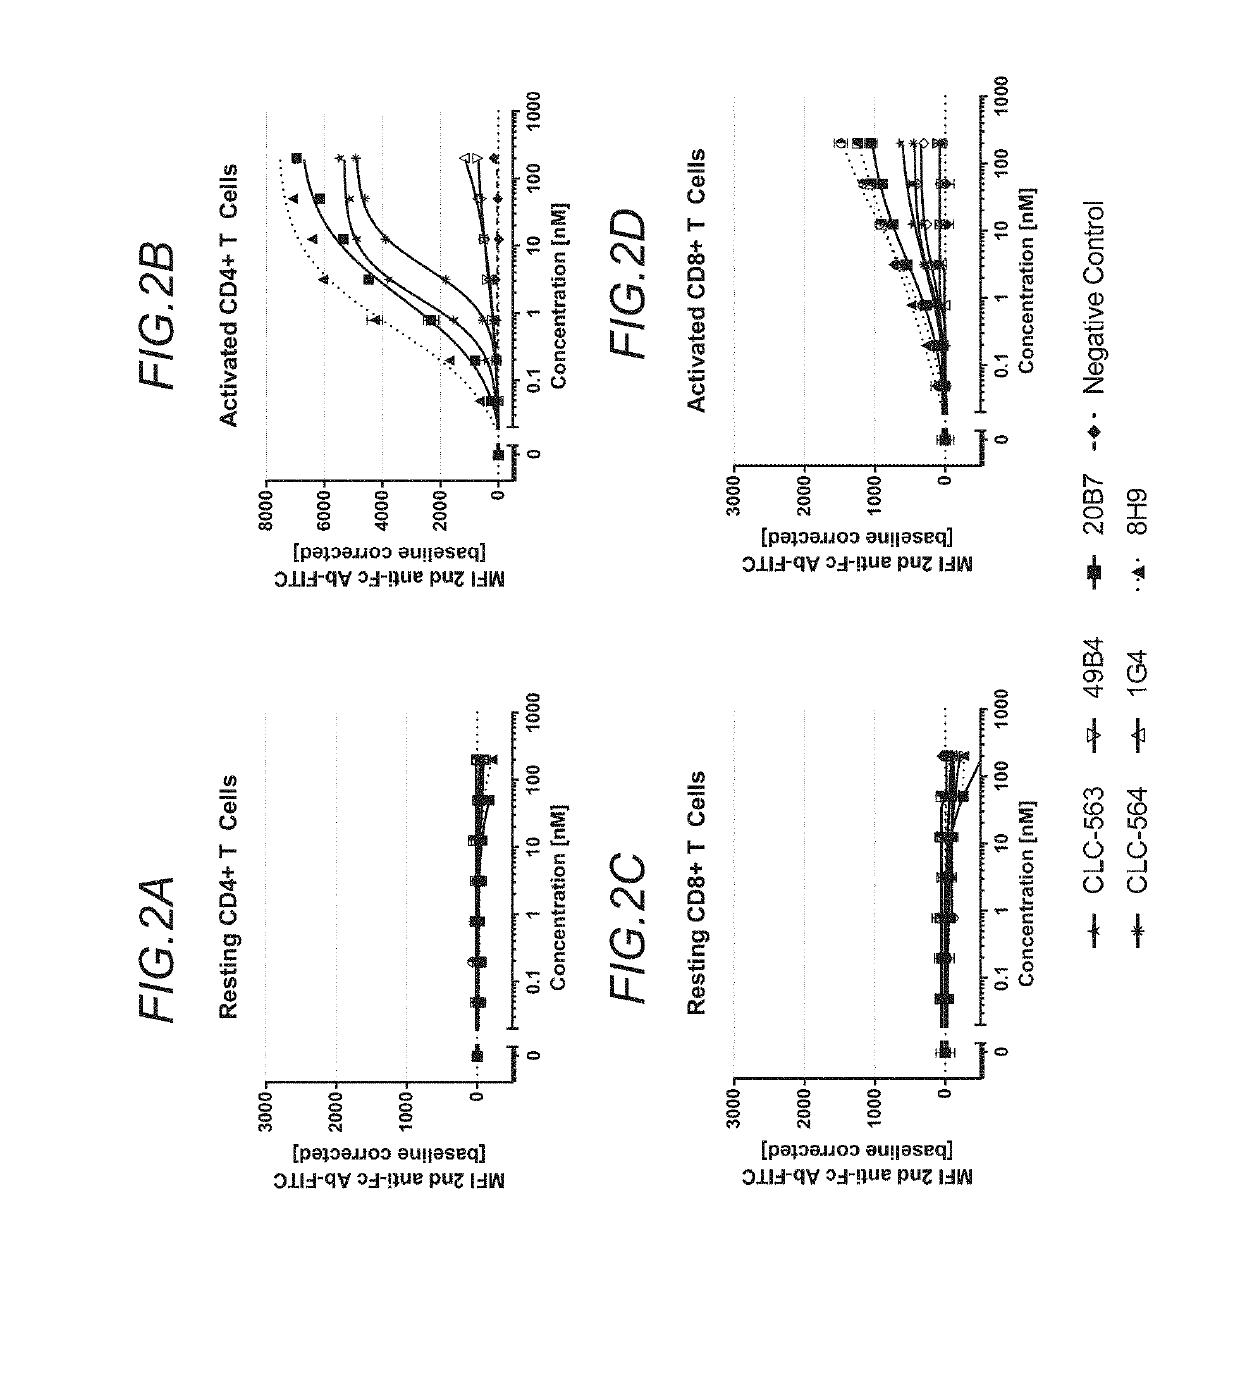 Bispecific antibodies with tetravalency for a costimulatory TNF receptor